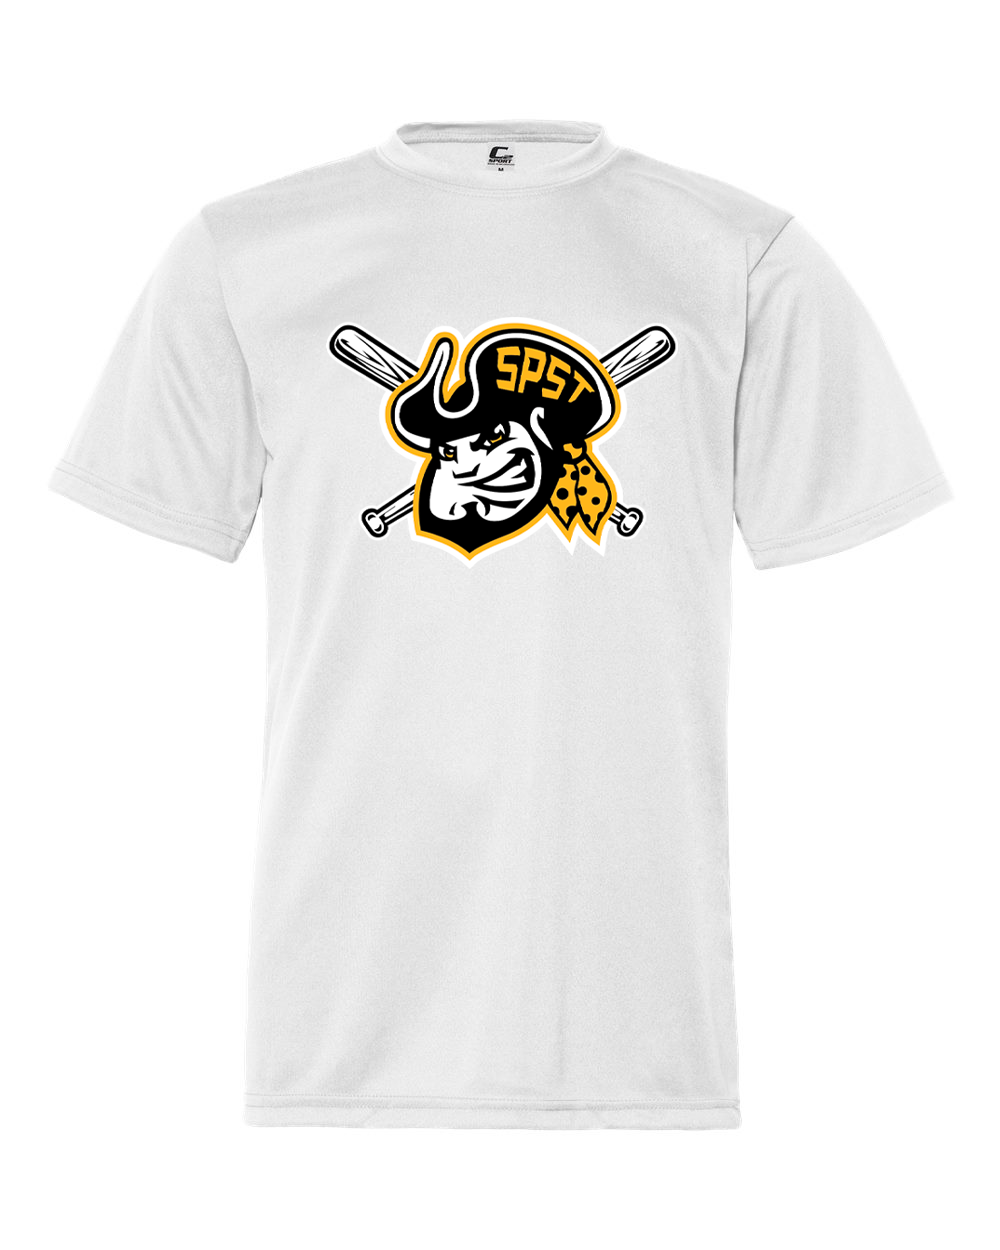 SPST Pirate Youth Performance T-Shirt - 5200